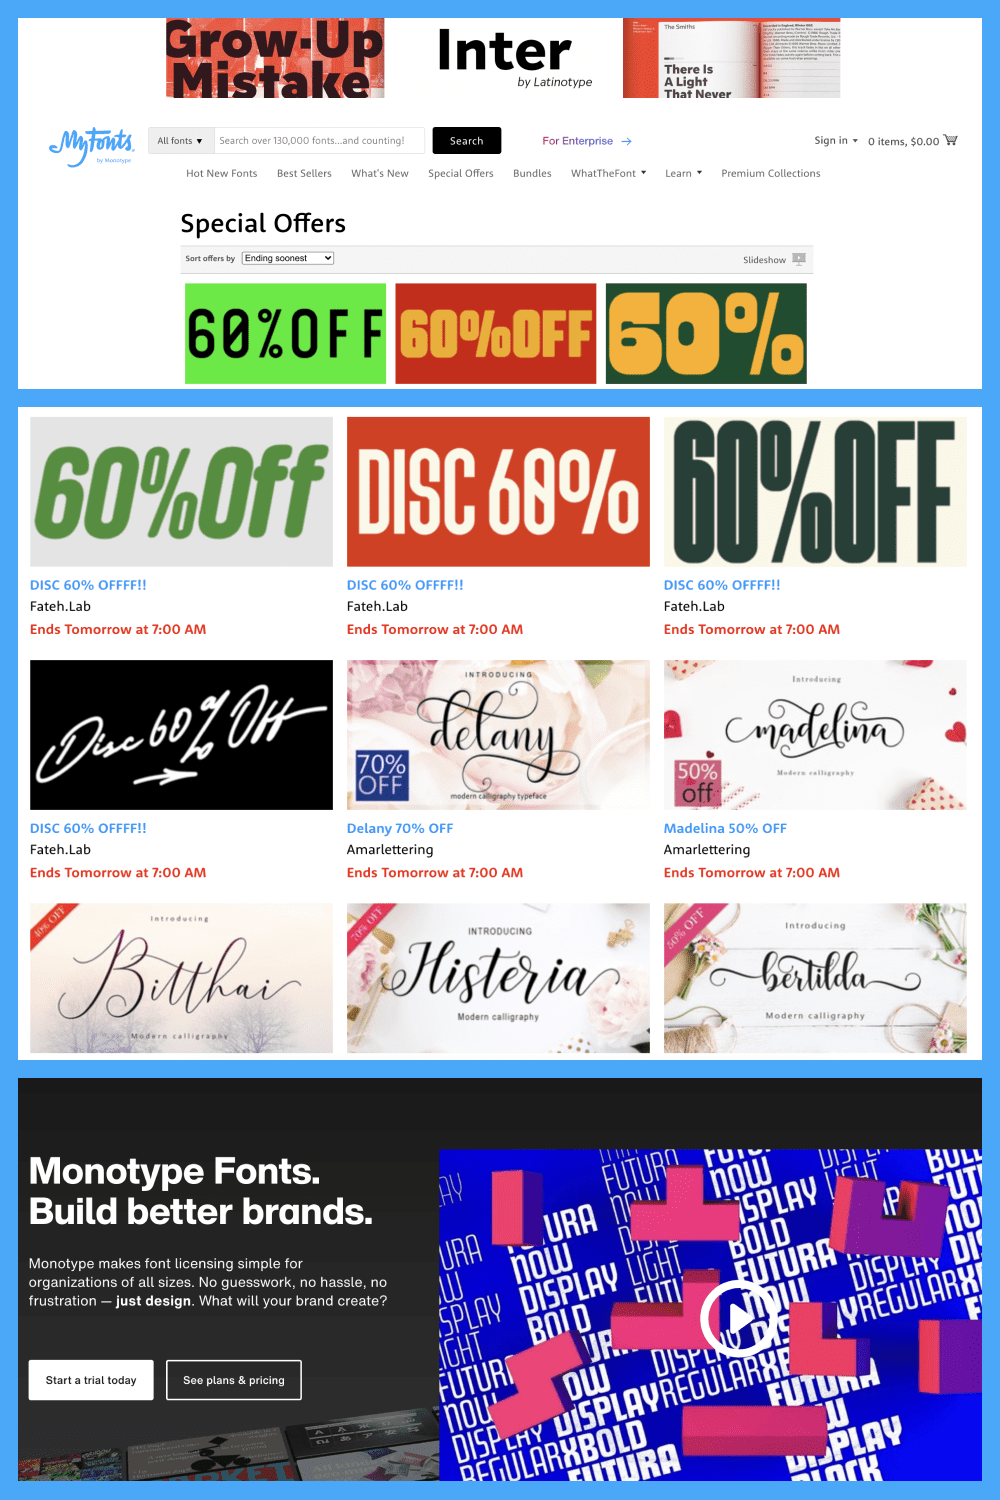 MyFonts – best sellers and special offers – 20-80% off.